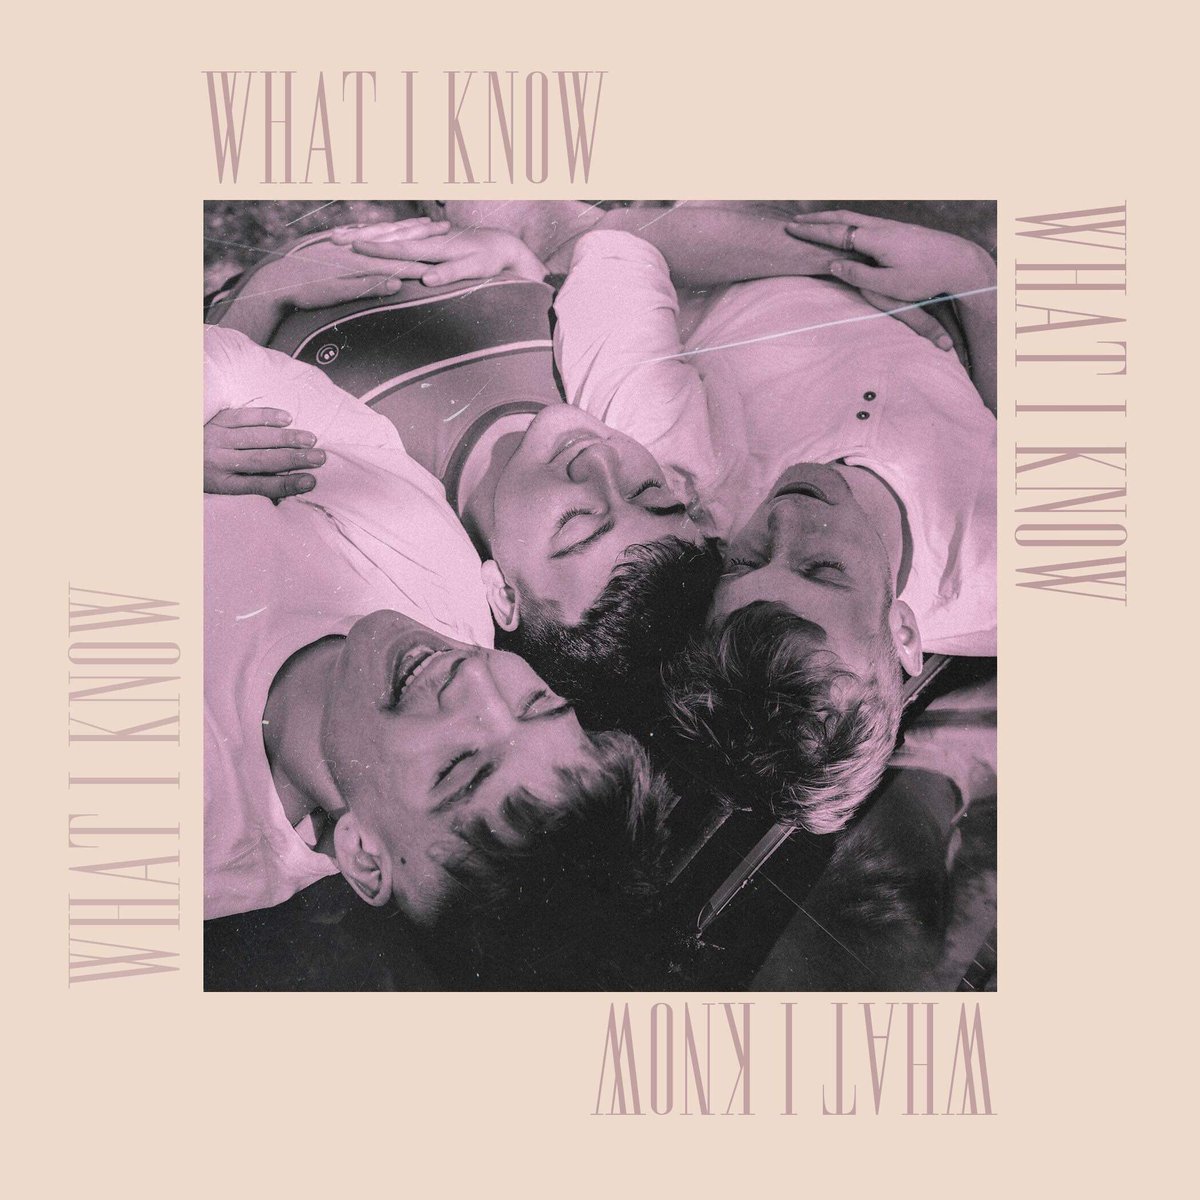 We are pleased to announce our new single, ‘What I Know’. Available on all streaming platforms Friday 19th July.

#bands #indiemusic #indieband #newmusic #englishband #southamptonmusic #brightonmusic #londonmusic #newband #savethedate #britishband #southcoastmusic